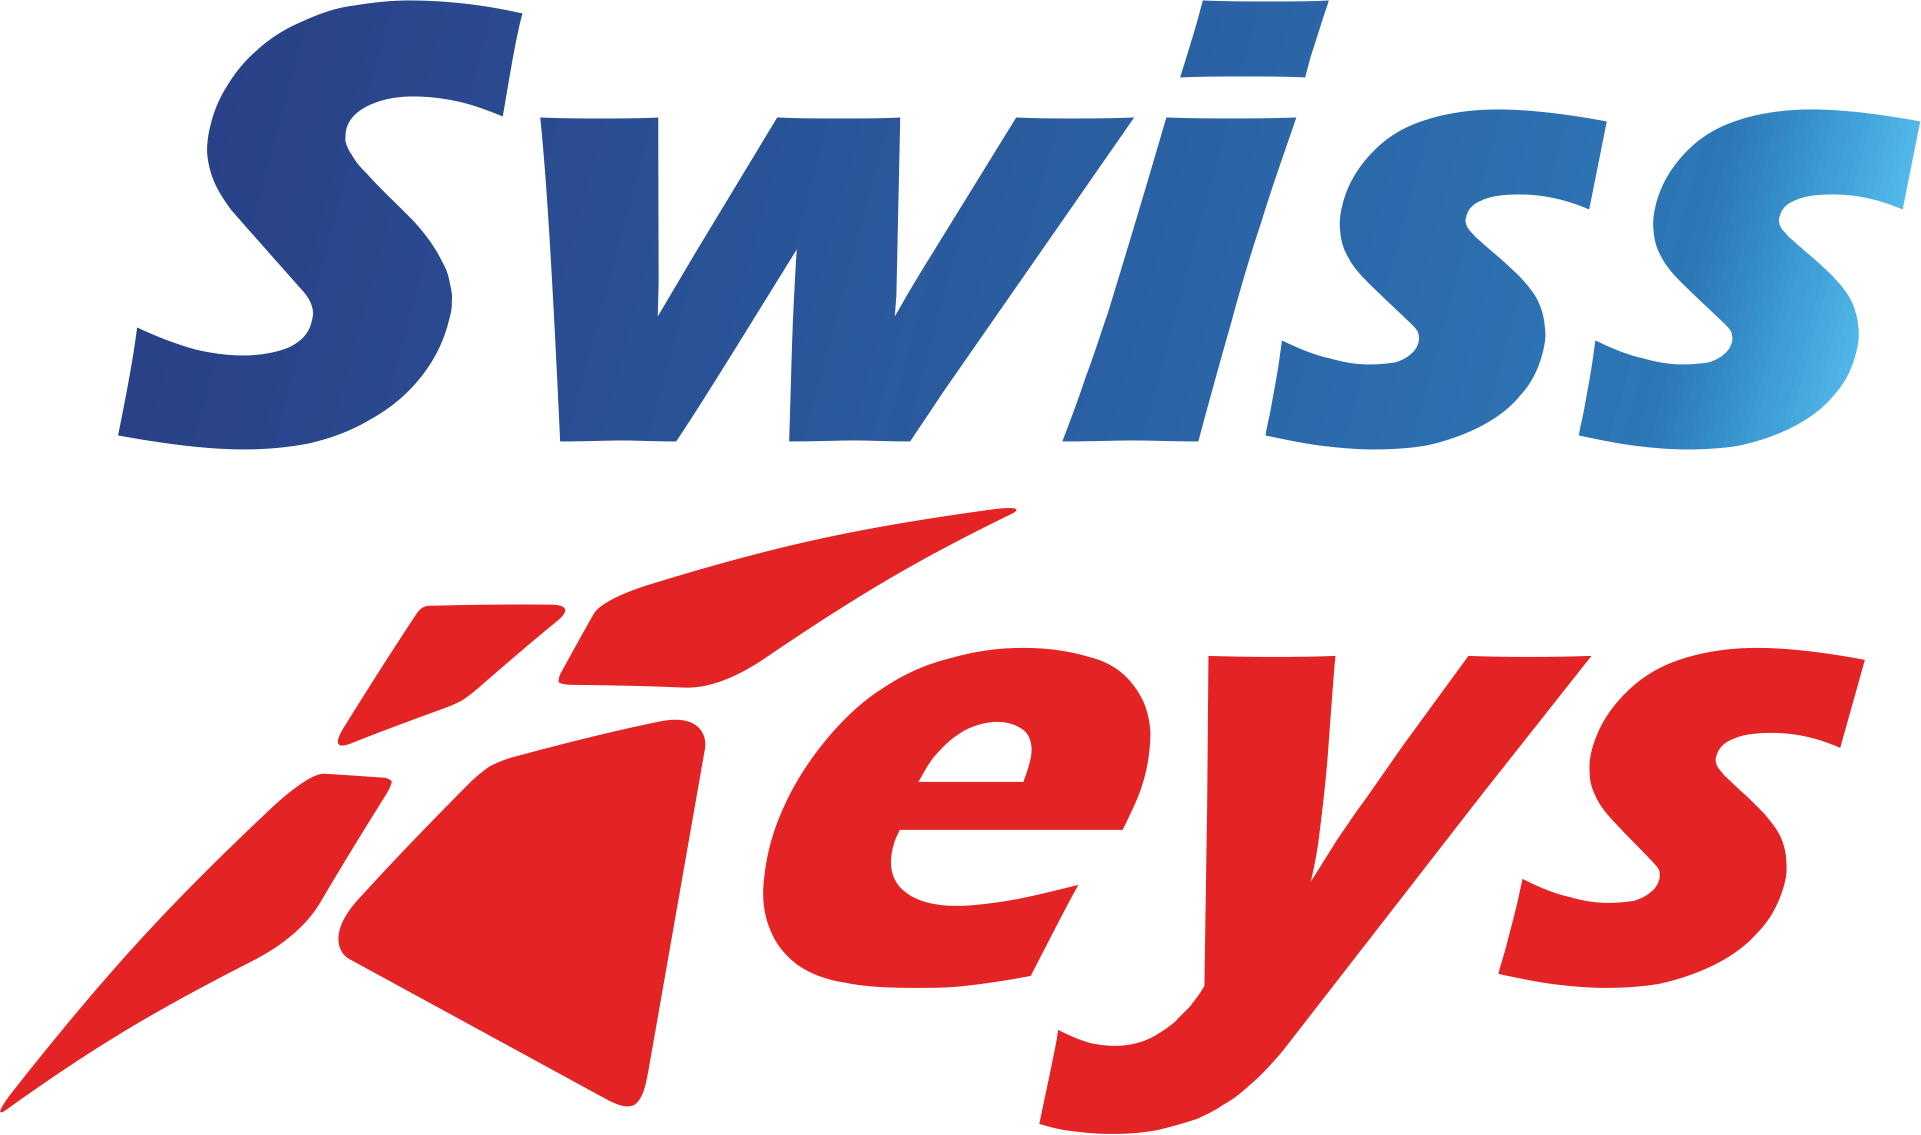 key swiss manager